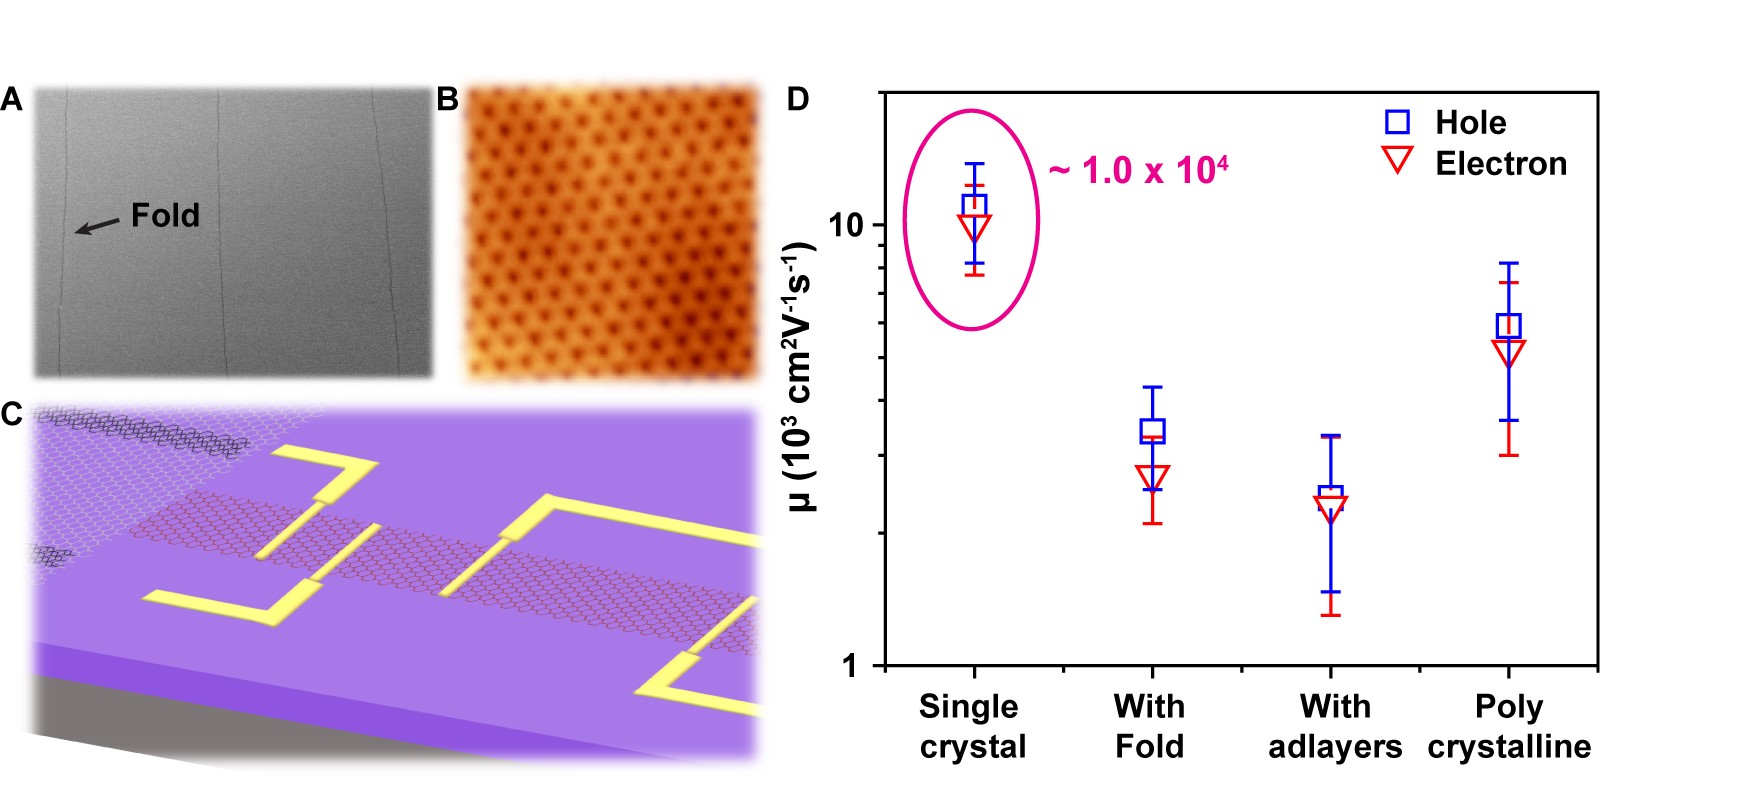 Figure 2 (A) SEM image of an adlayer-free single crystal graphene film with parallel long folds on a Cu(111) foil. (B) A high-resolution ultra-high-vacuum STM image of the honeycomb lattice of the single crystal graphene film. (C) Schematic illustration for straightforward fabrication of high-performance field-effect transistors in the region lying between two adjacent folds in the single crystal graphene film. (D) Carrier mobilities measured from field-effect transistors patterned with various kinds of graphene samples; adlayer-free single crystal graphene film shows the best performance. 